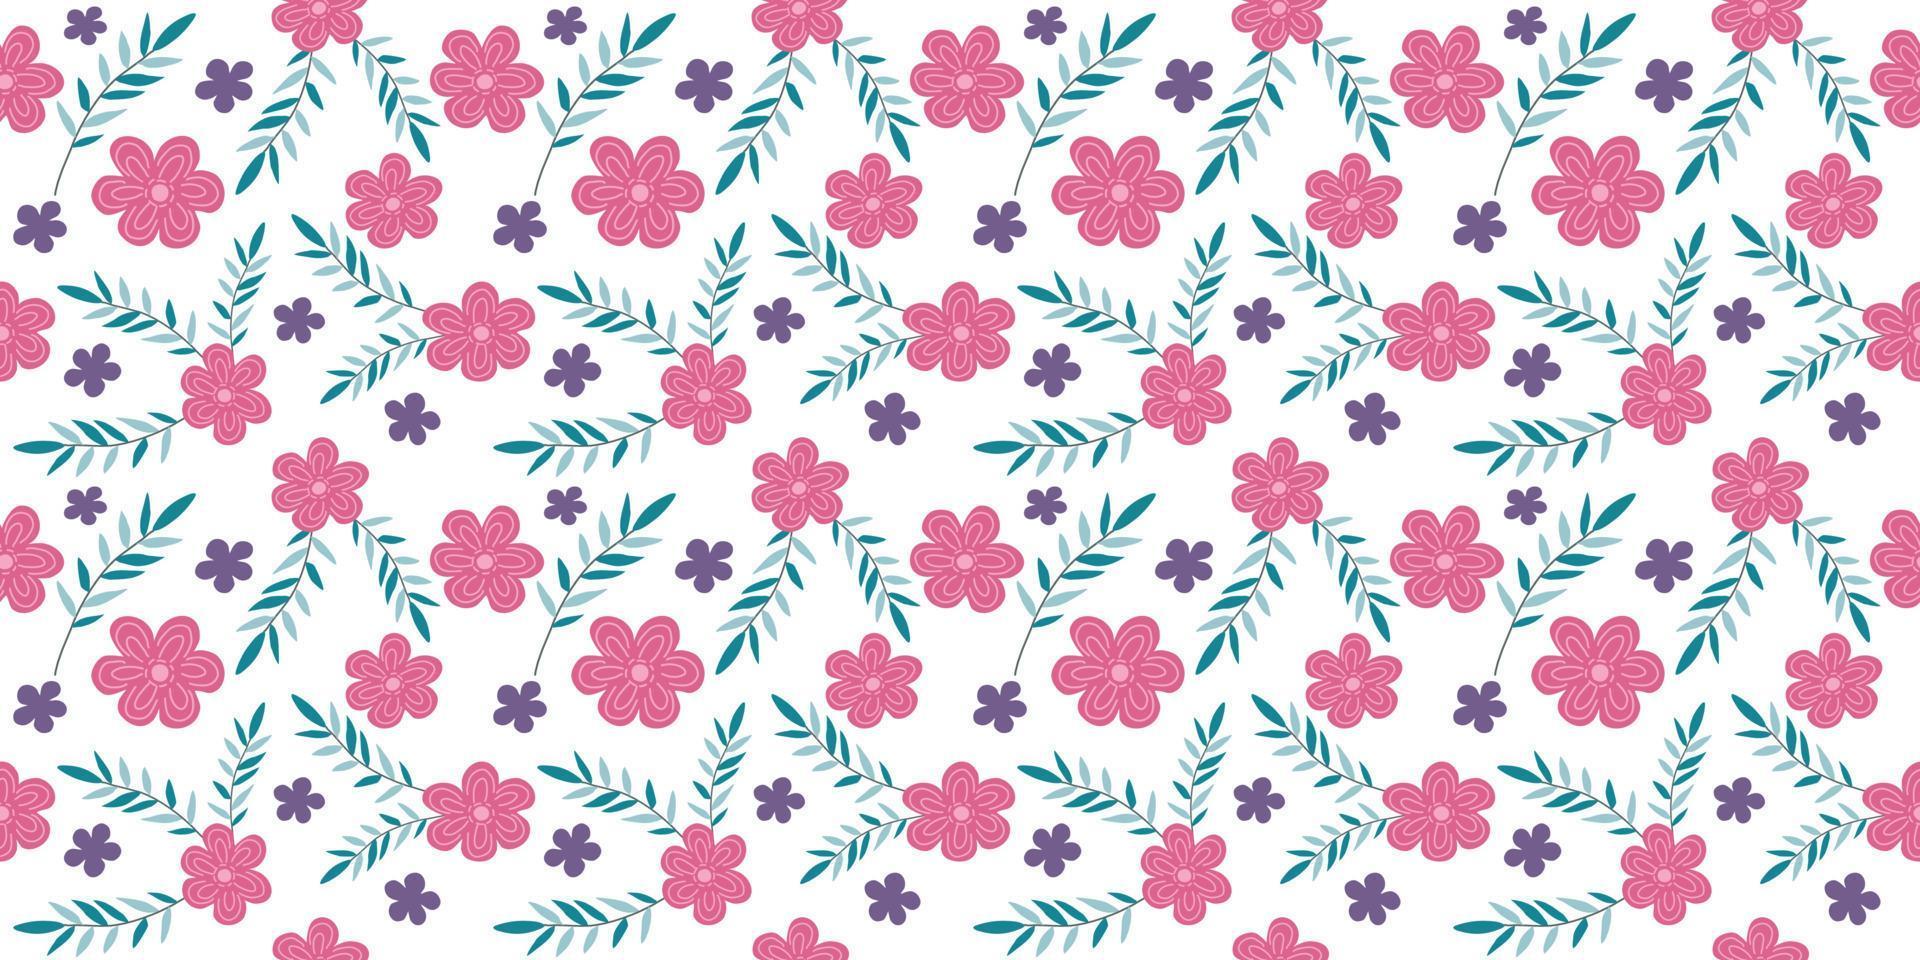 A collection of seamless floral patterns, white background doodle style vector